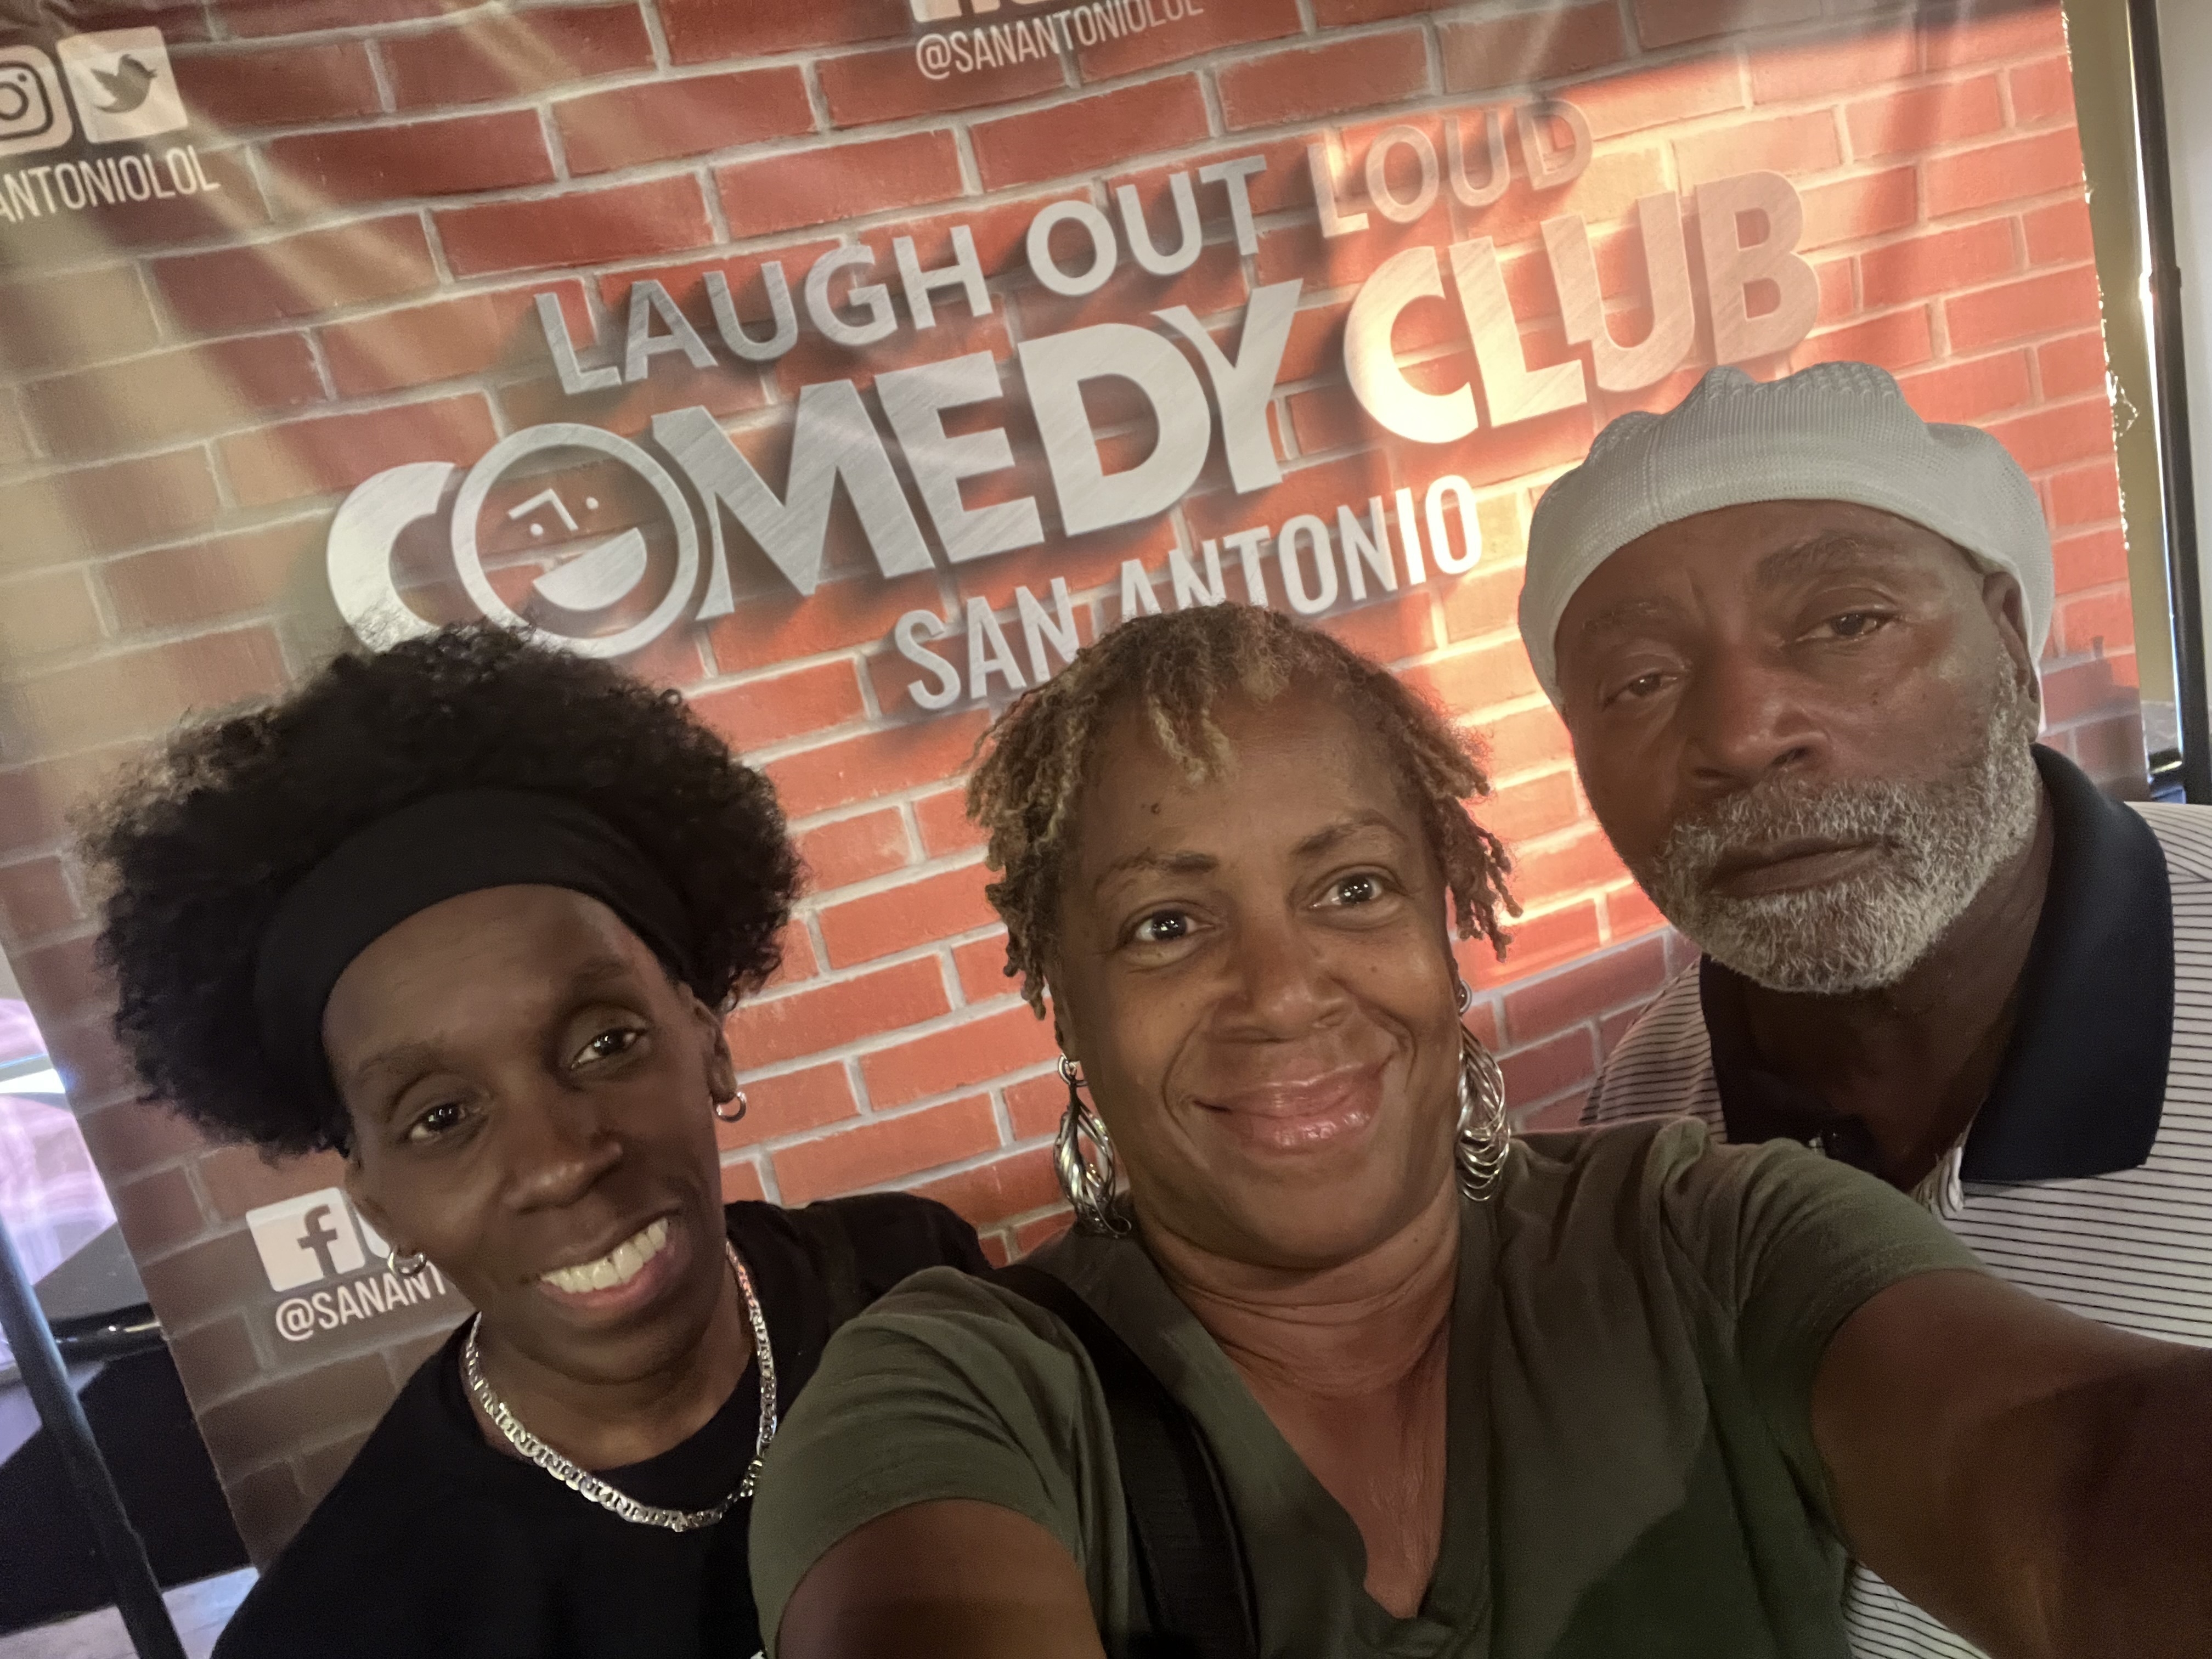 Laugh Out Loud Comedy Club